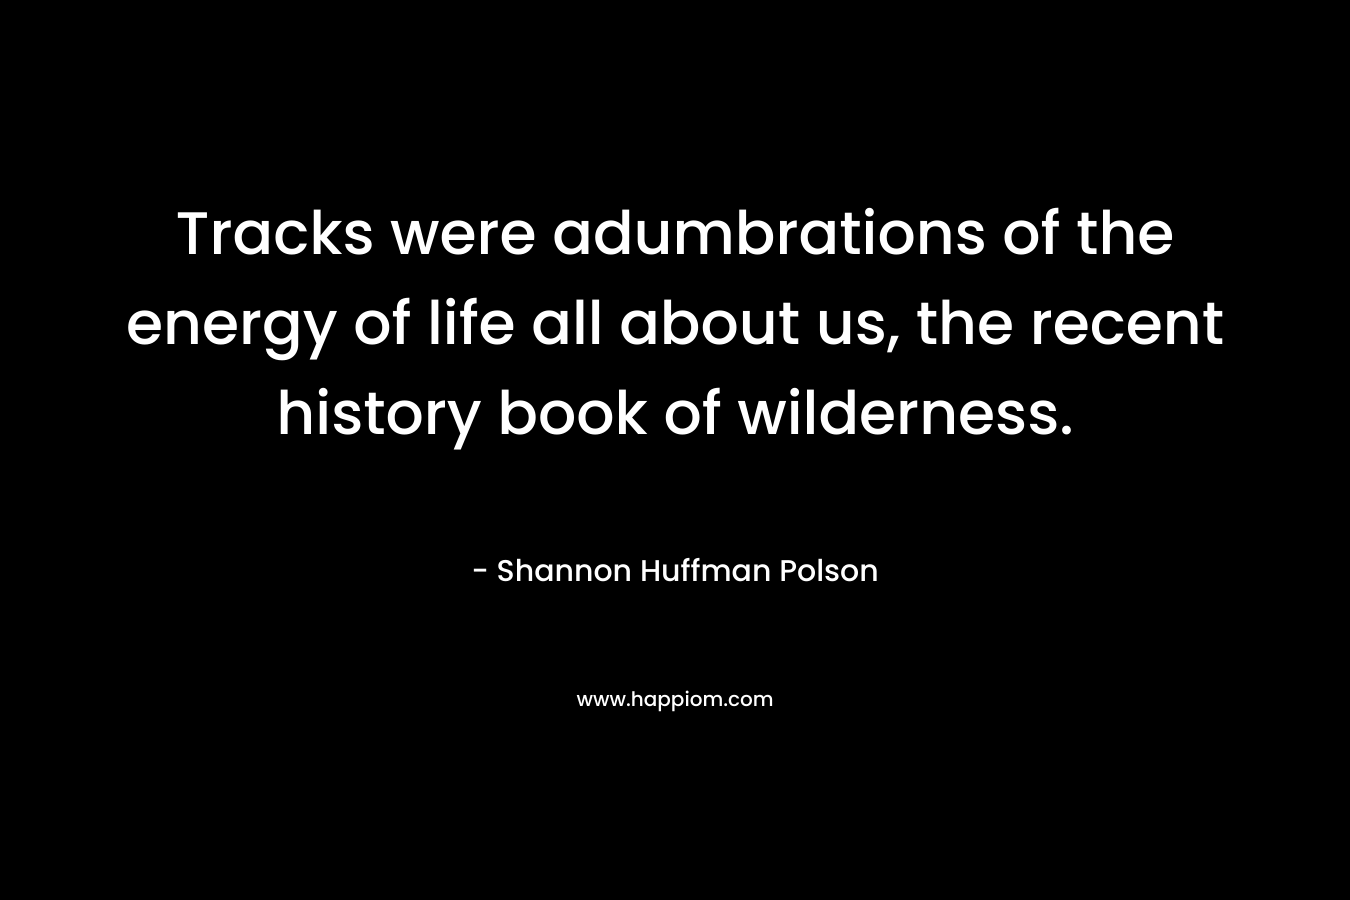 Tracks were adumbrations of the energy of life all about us, the recent history book of wilderness.